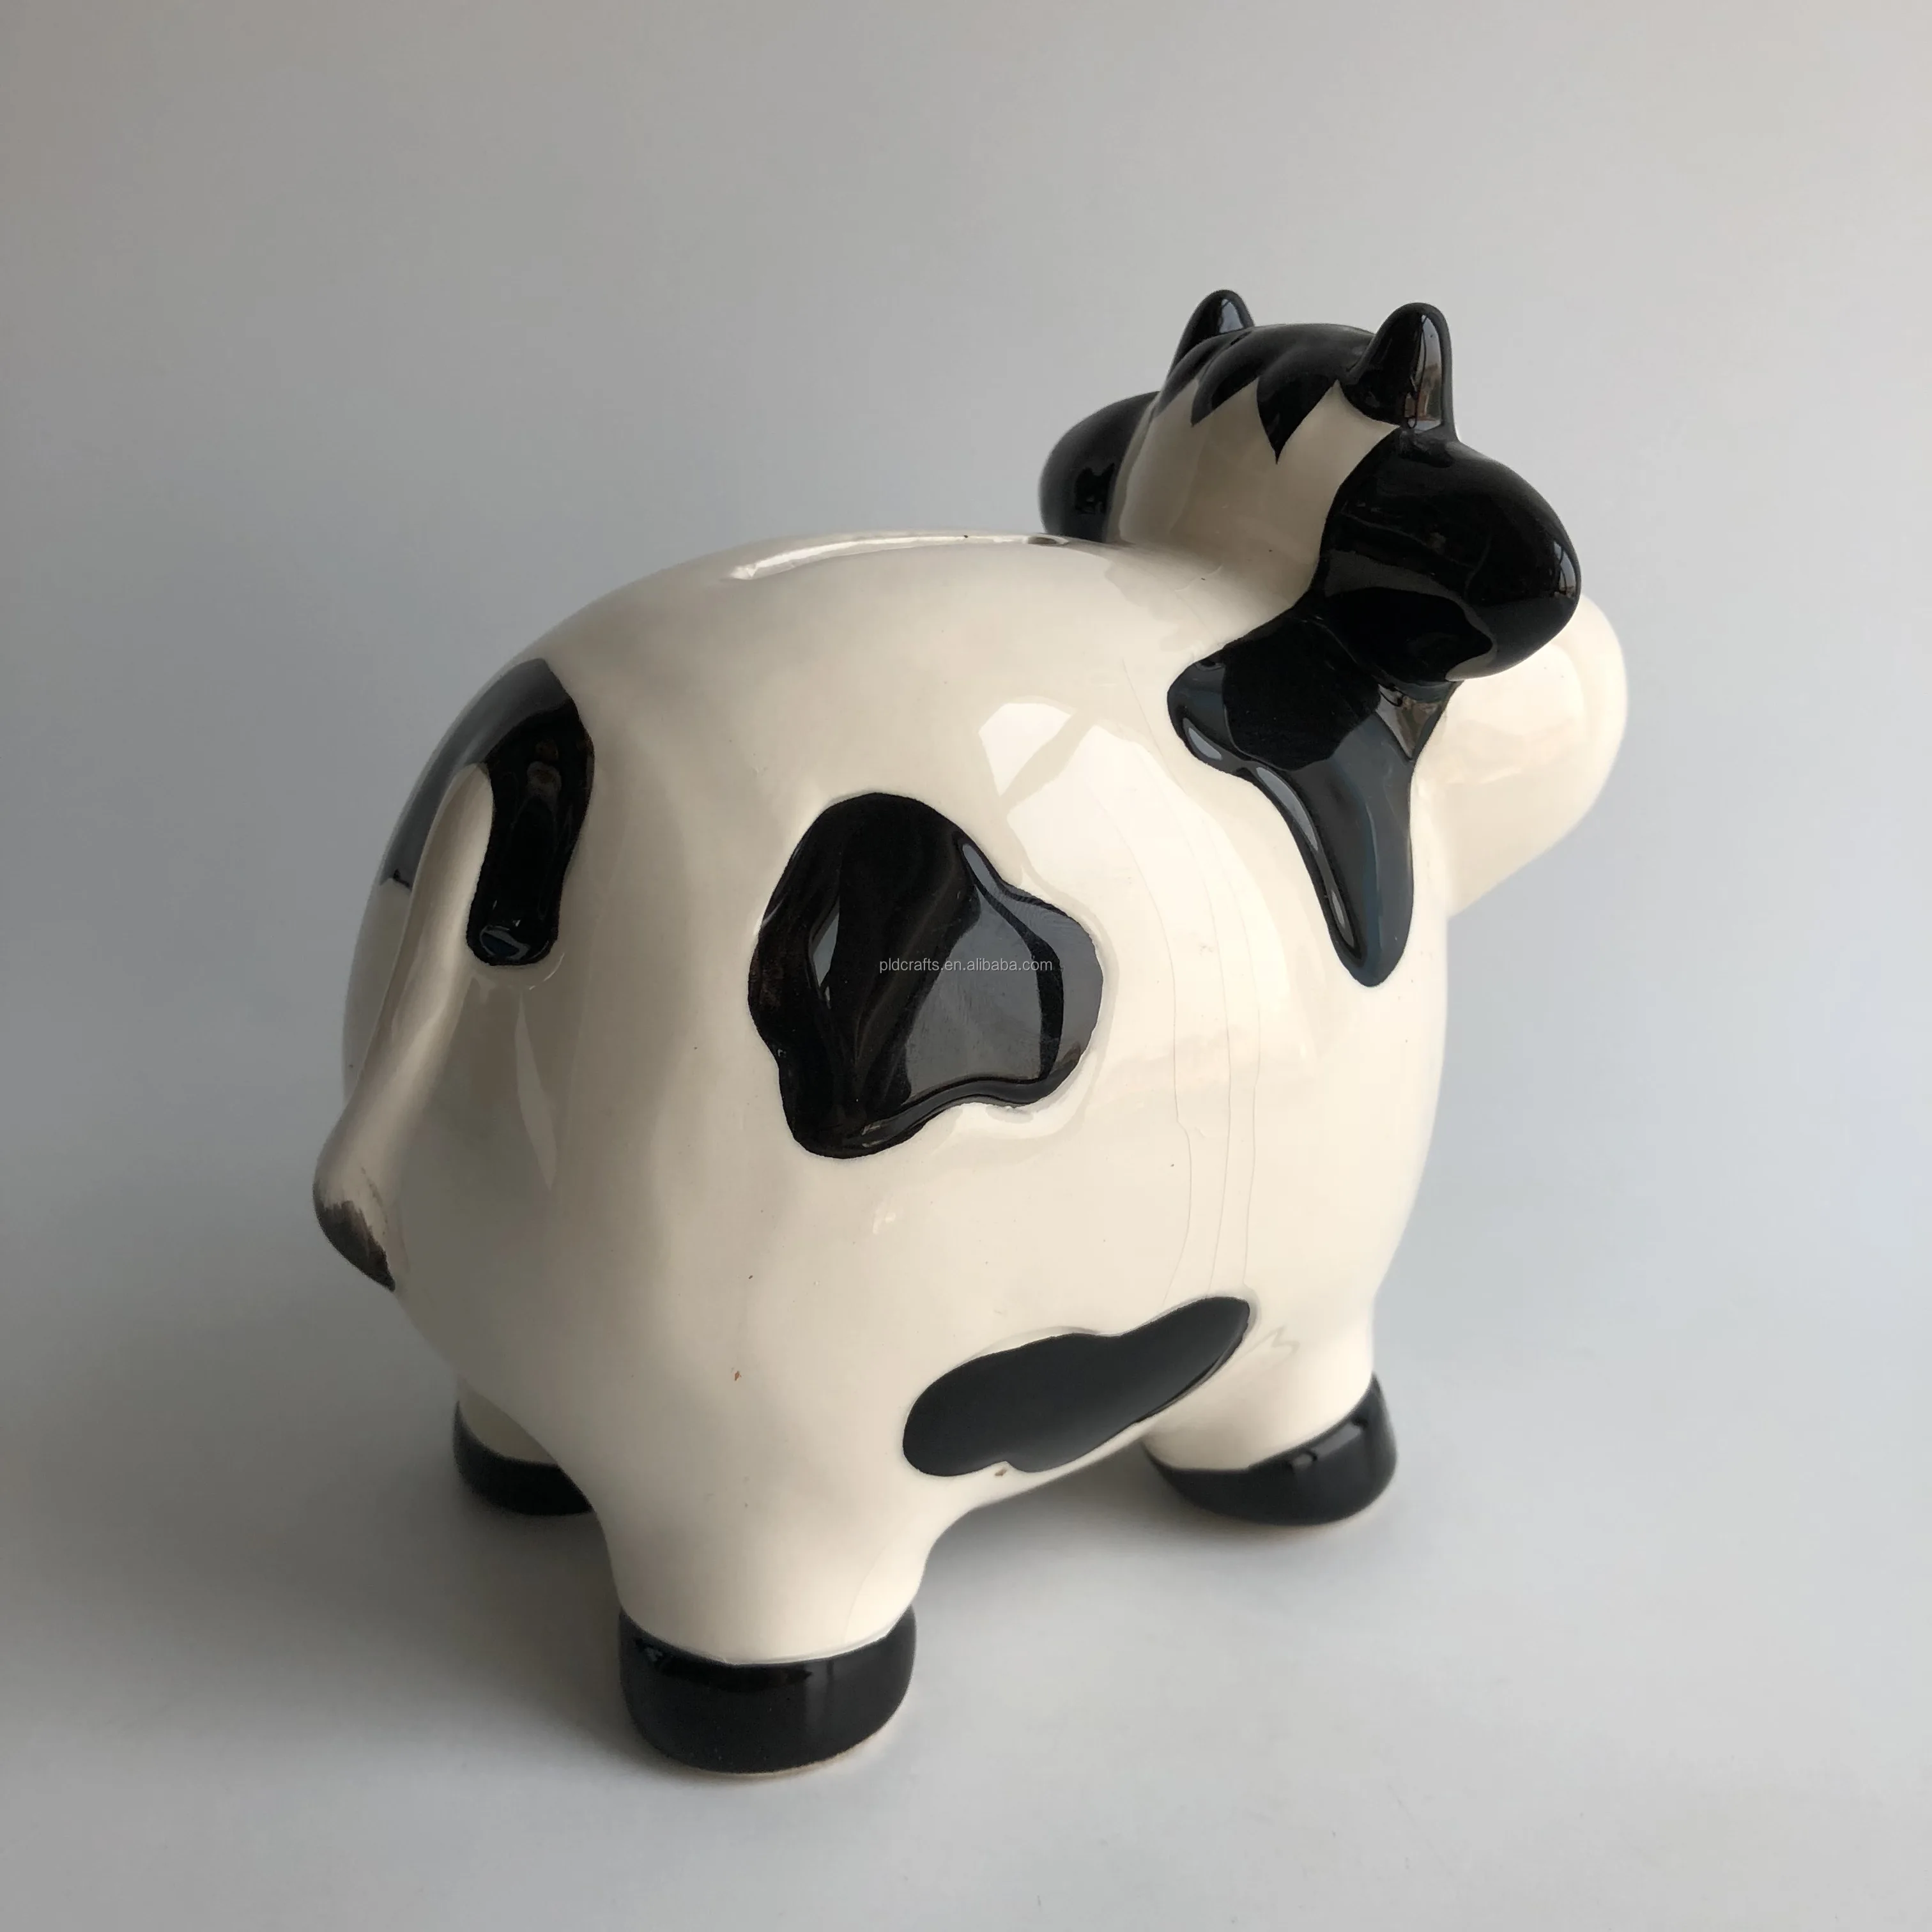 Details about   Coin Piggy Bank Ceramic Savings Animal Dairy Cow NEW multicolor rose red base 